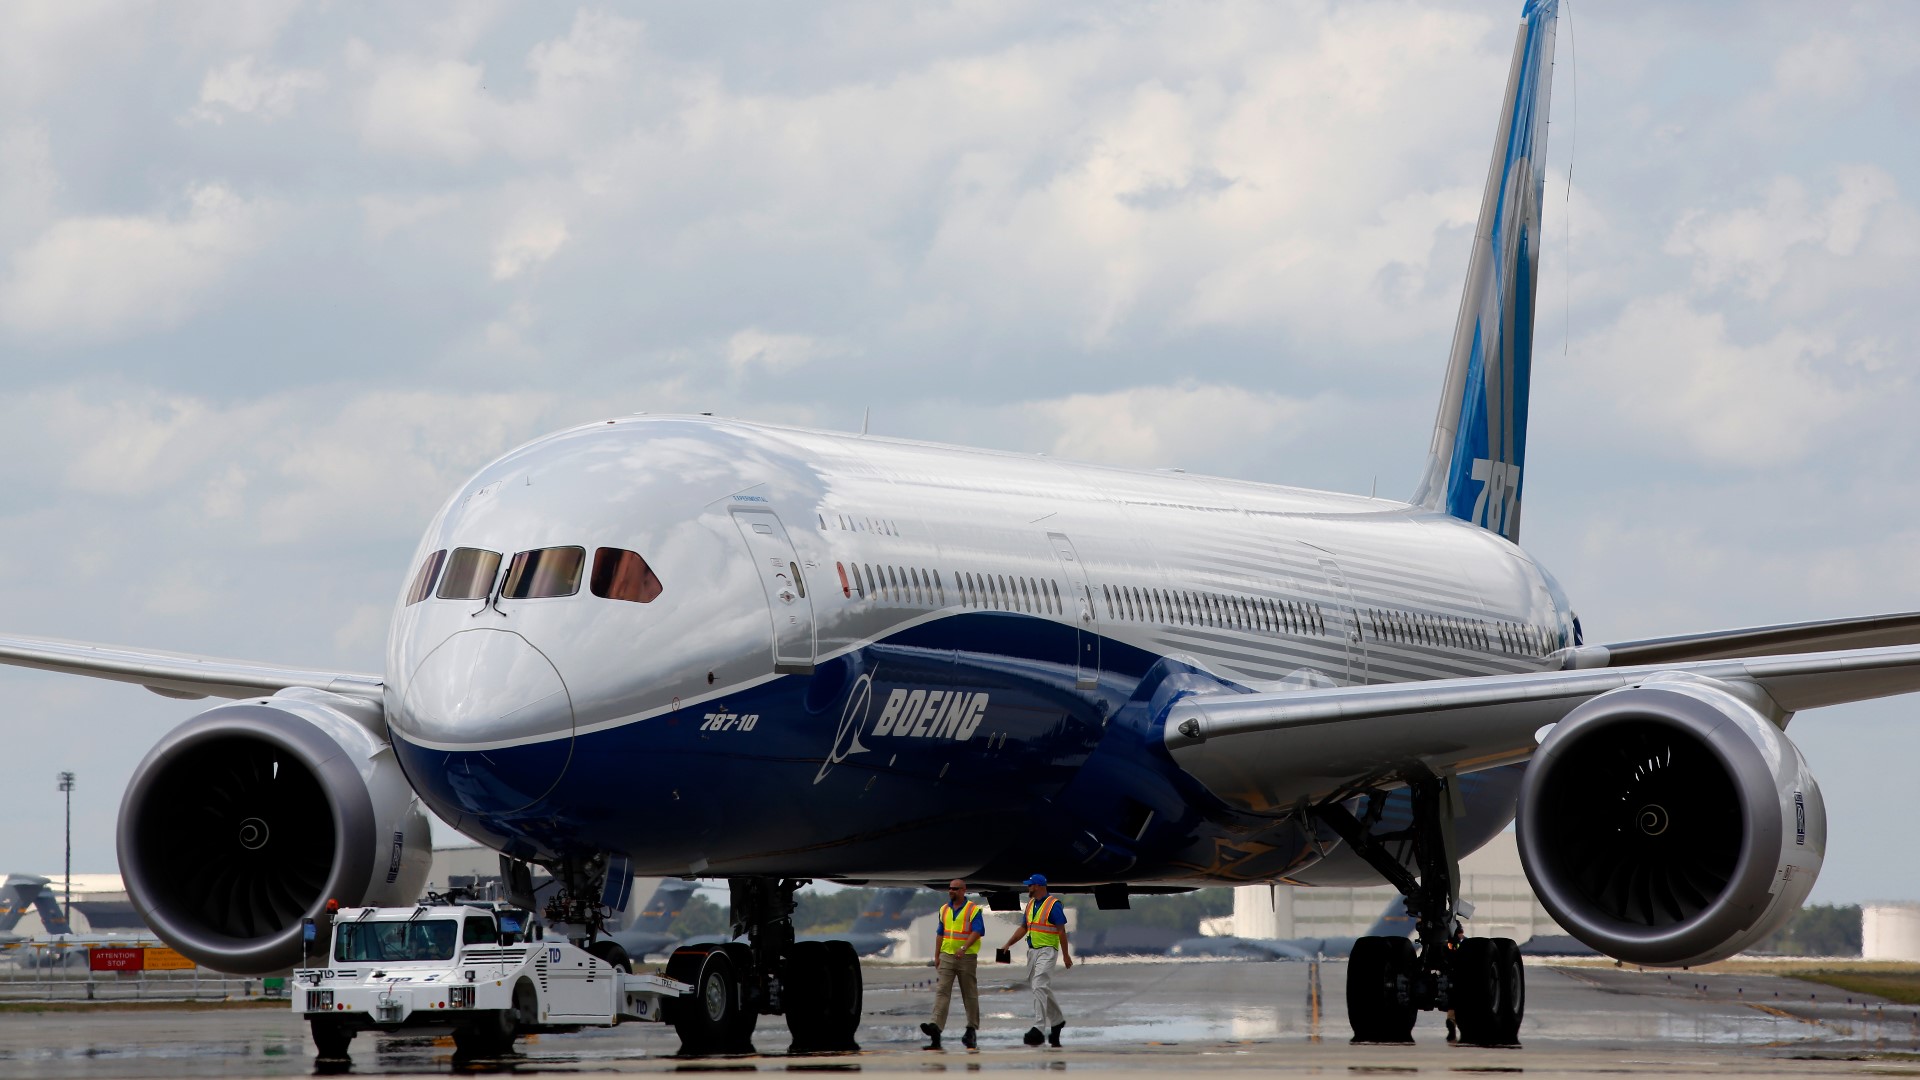 The engineer who is currently with Boeing said he became alarmed by what he was seeing in the production and reportedly raised the concerns to his bosses.